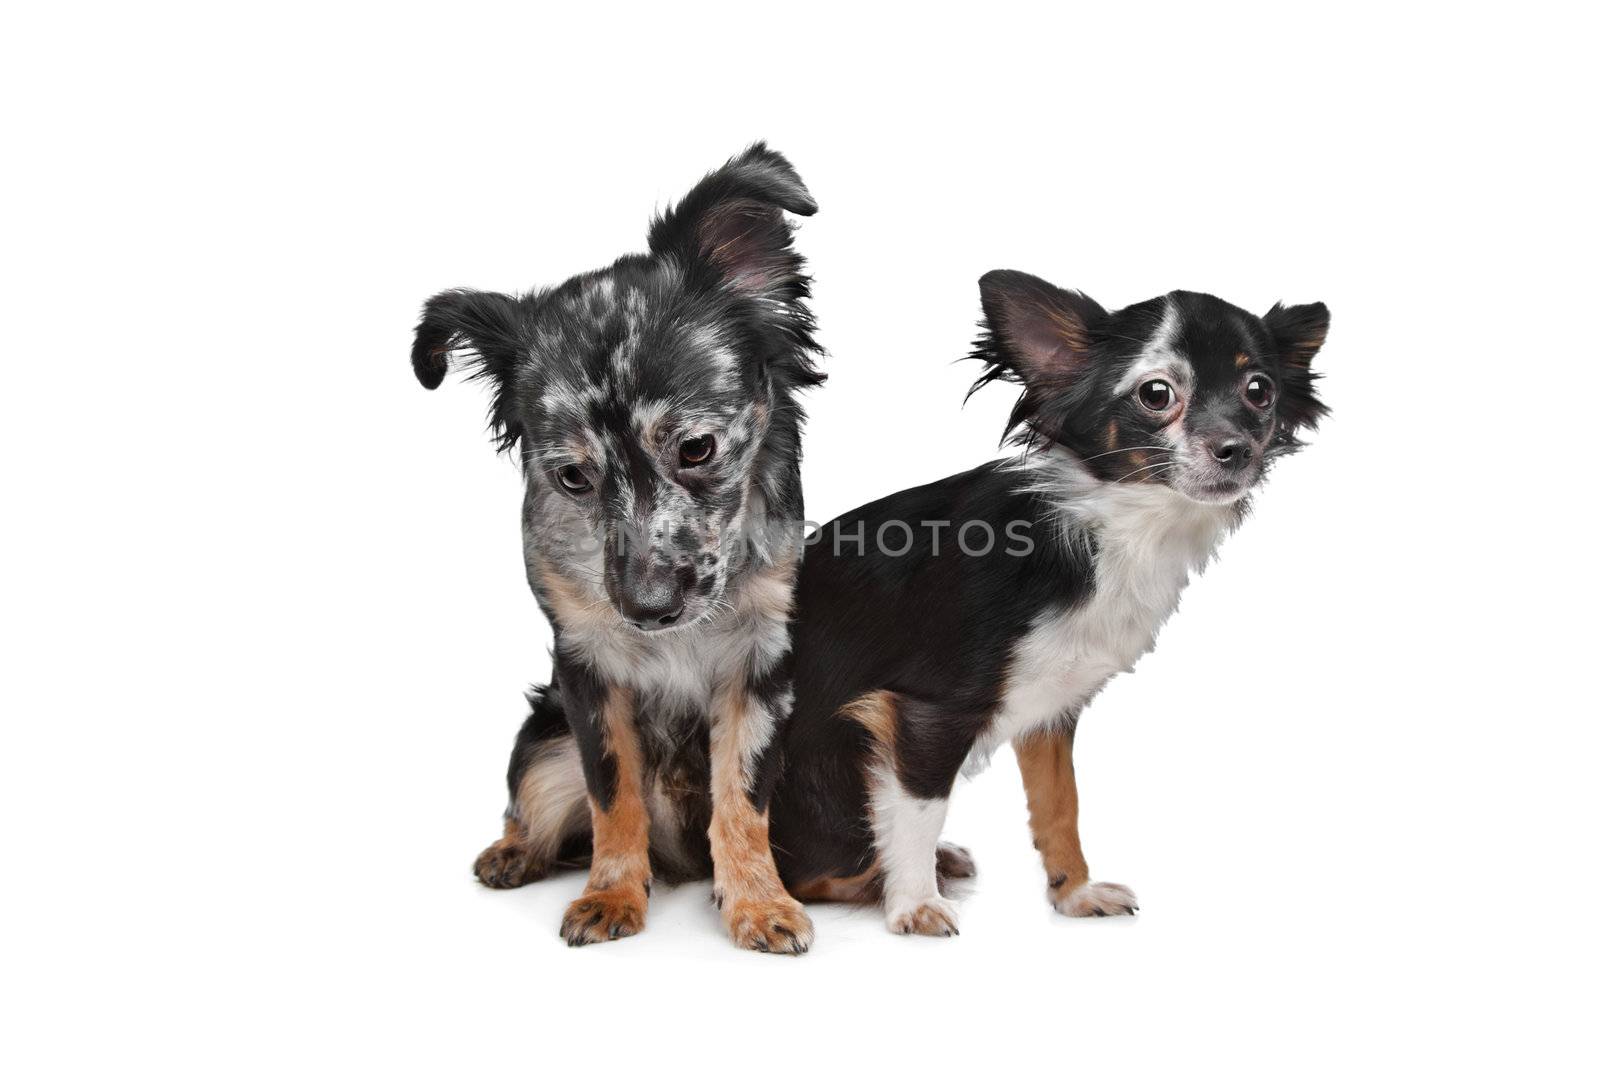 Two Chihuahua dogs by eriklam